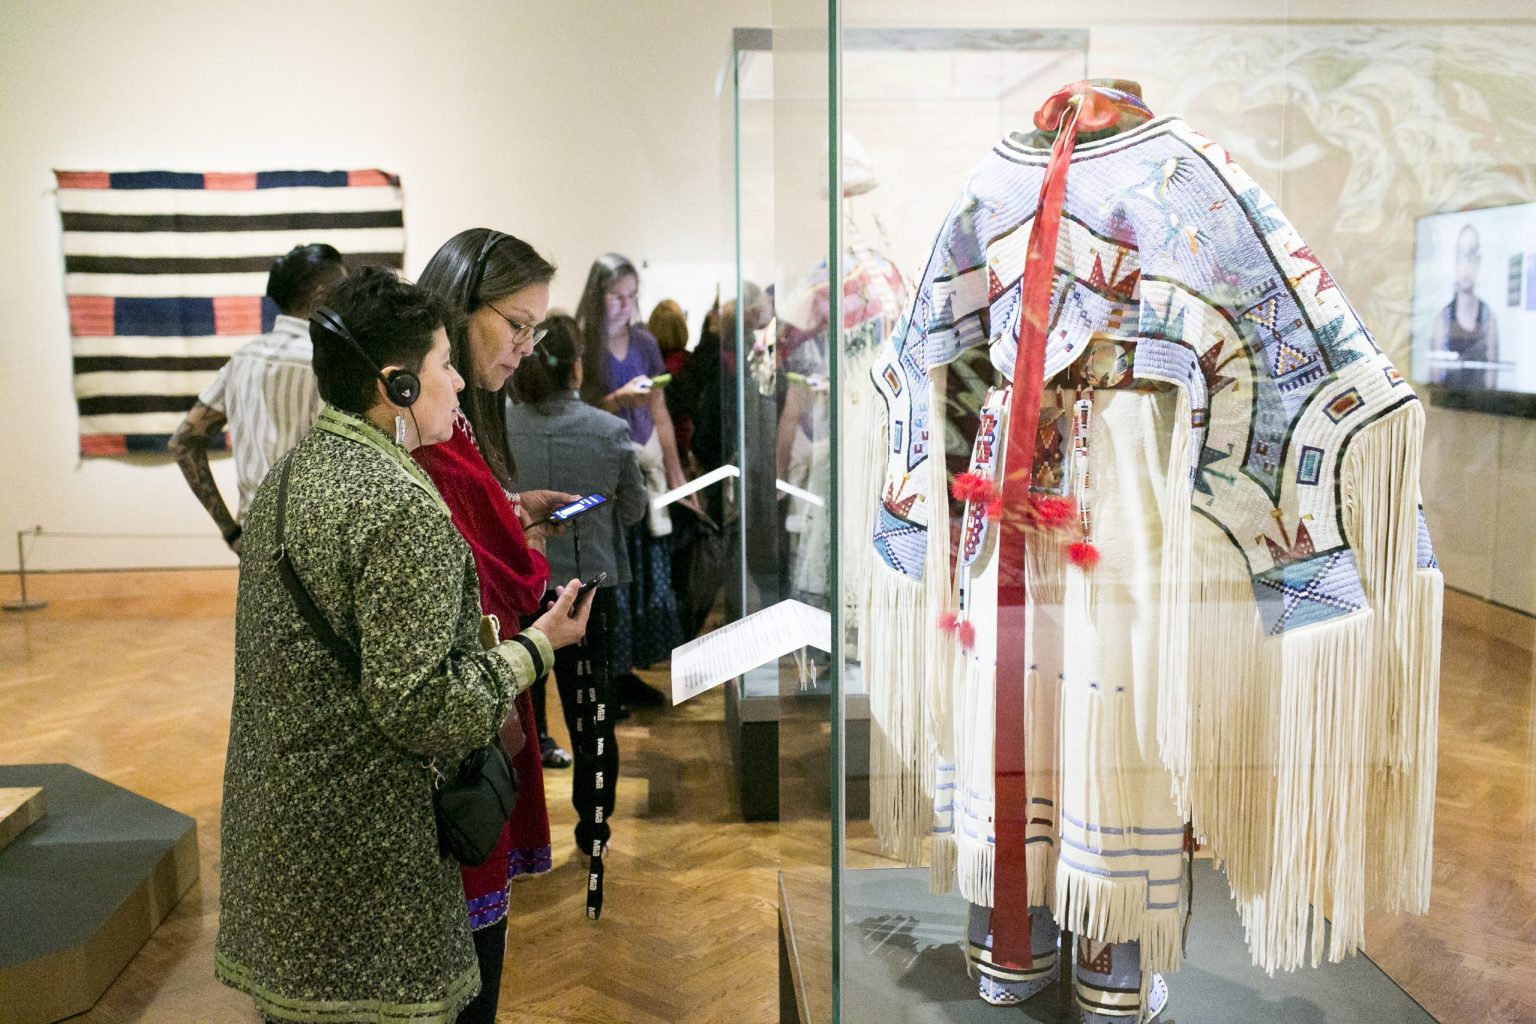 Visitors look at clothing, textiles, and video interviews displayed in galleries